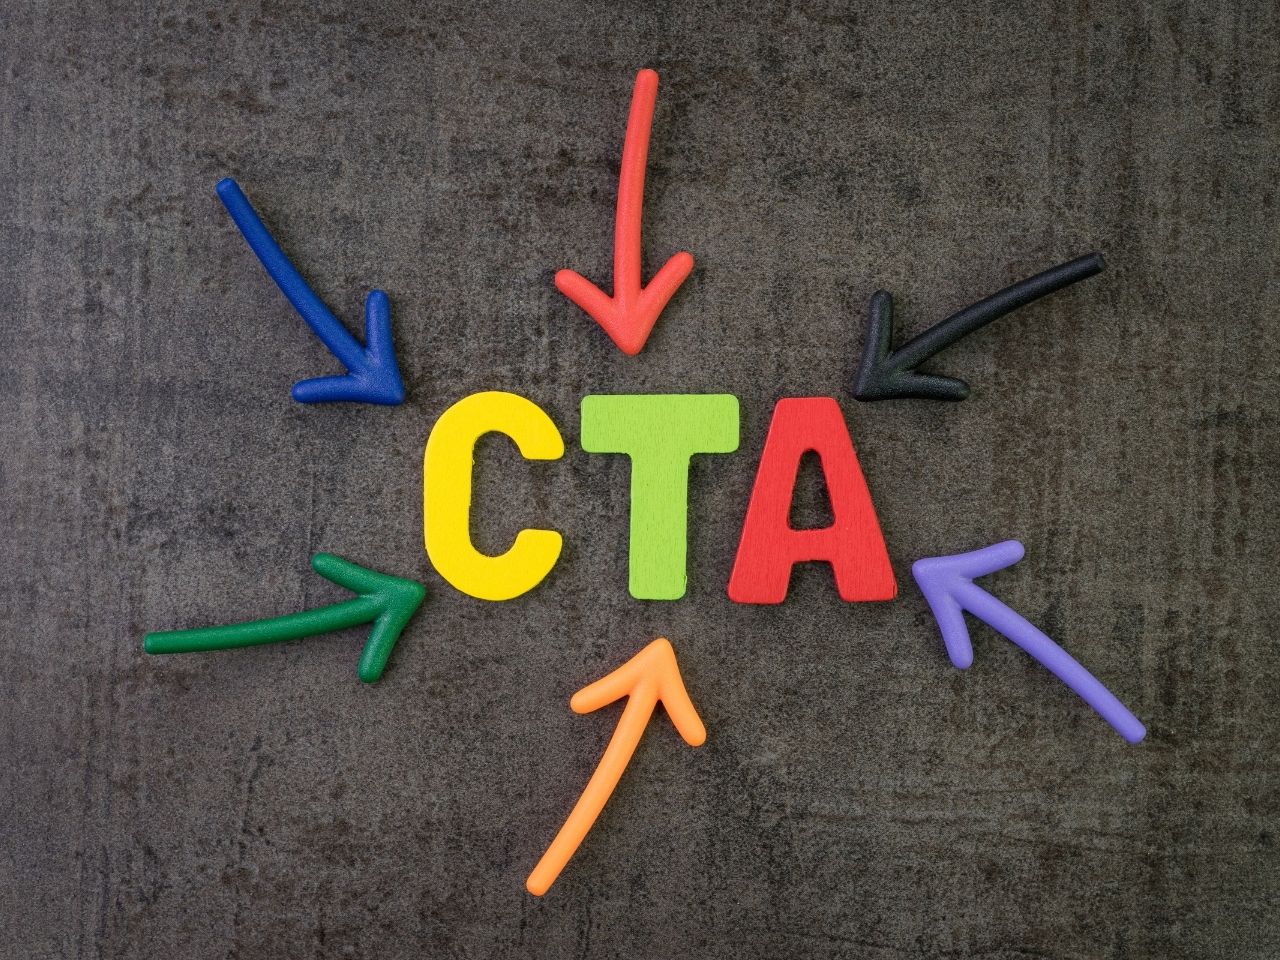 Arrows pointing to CTA